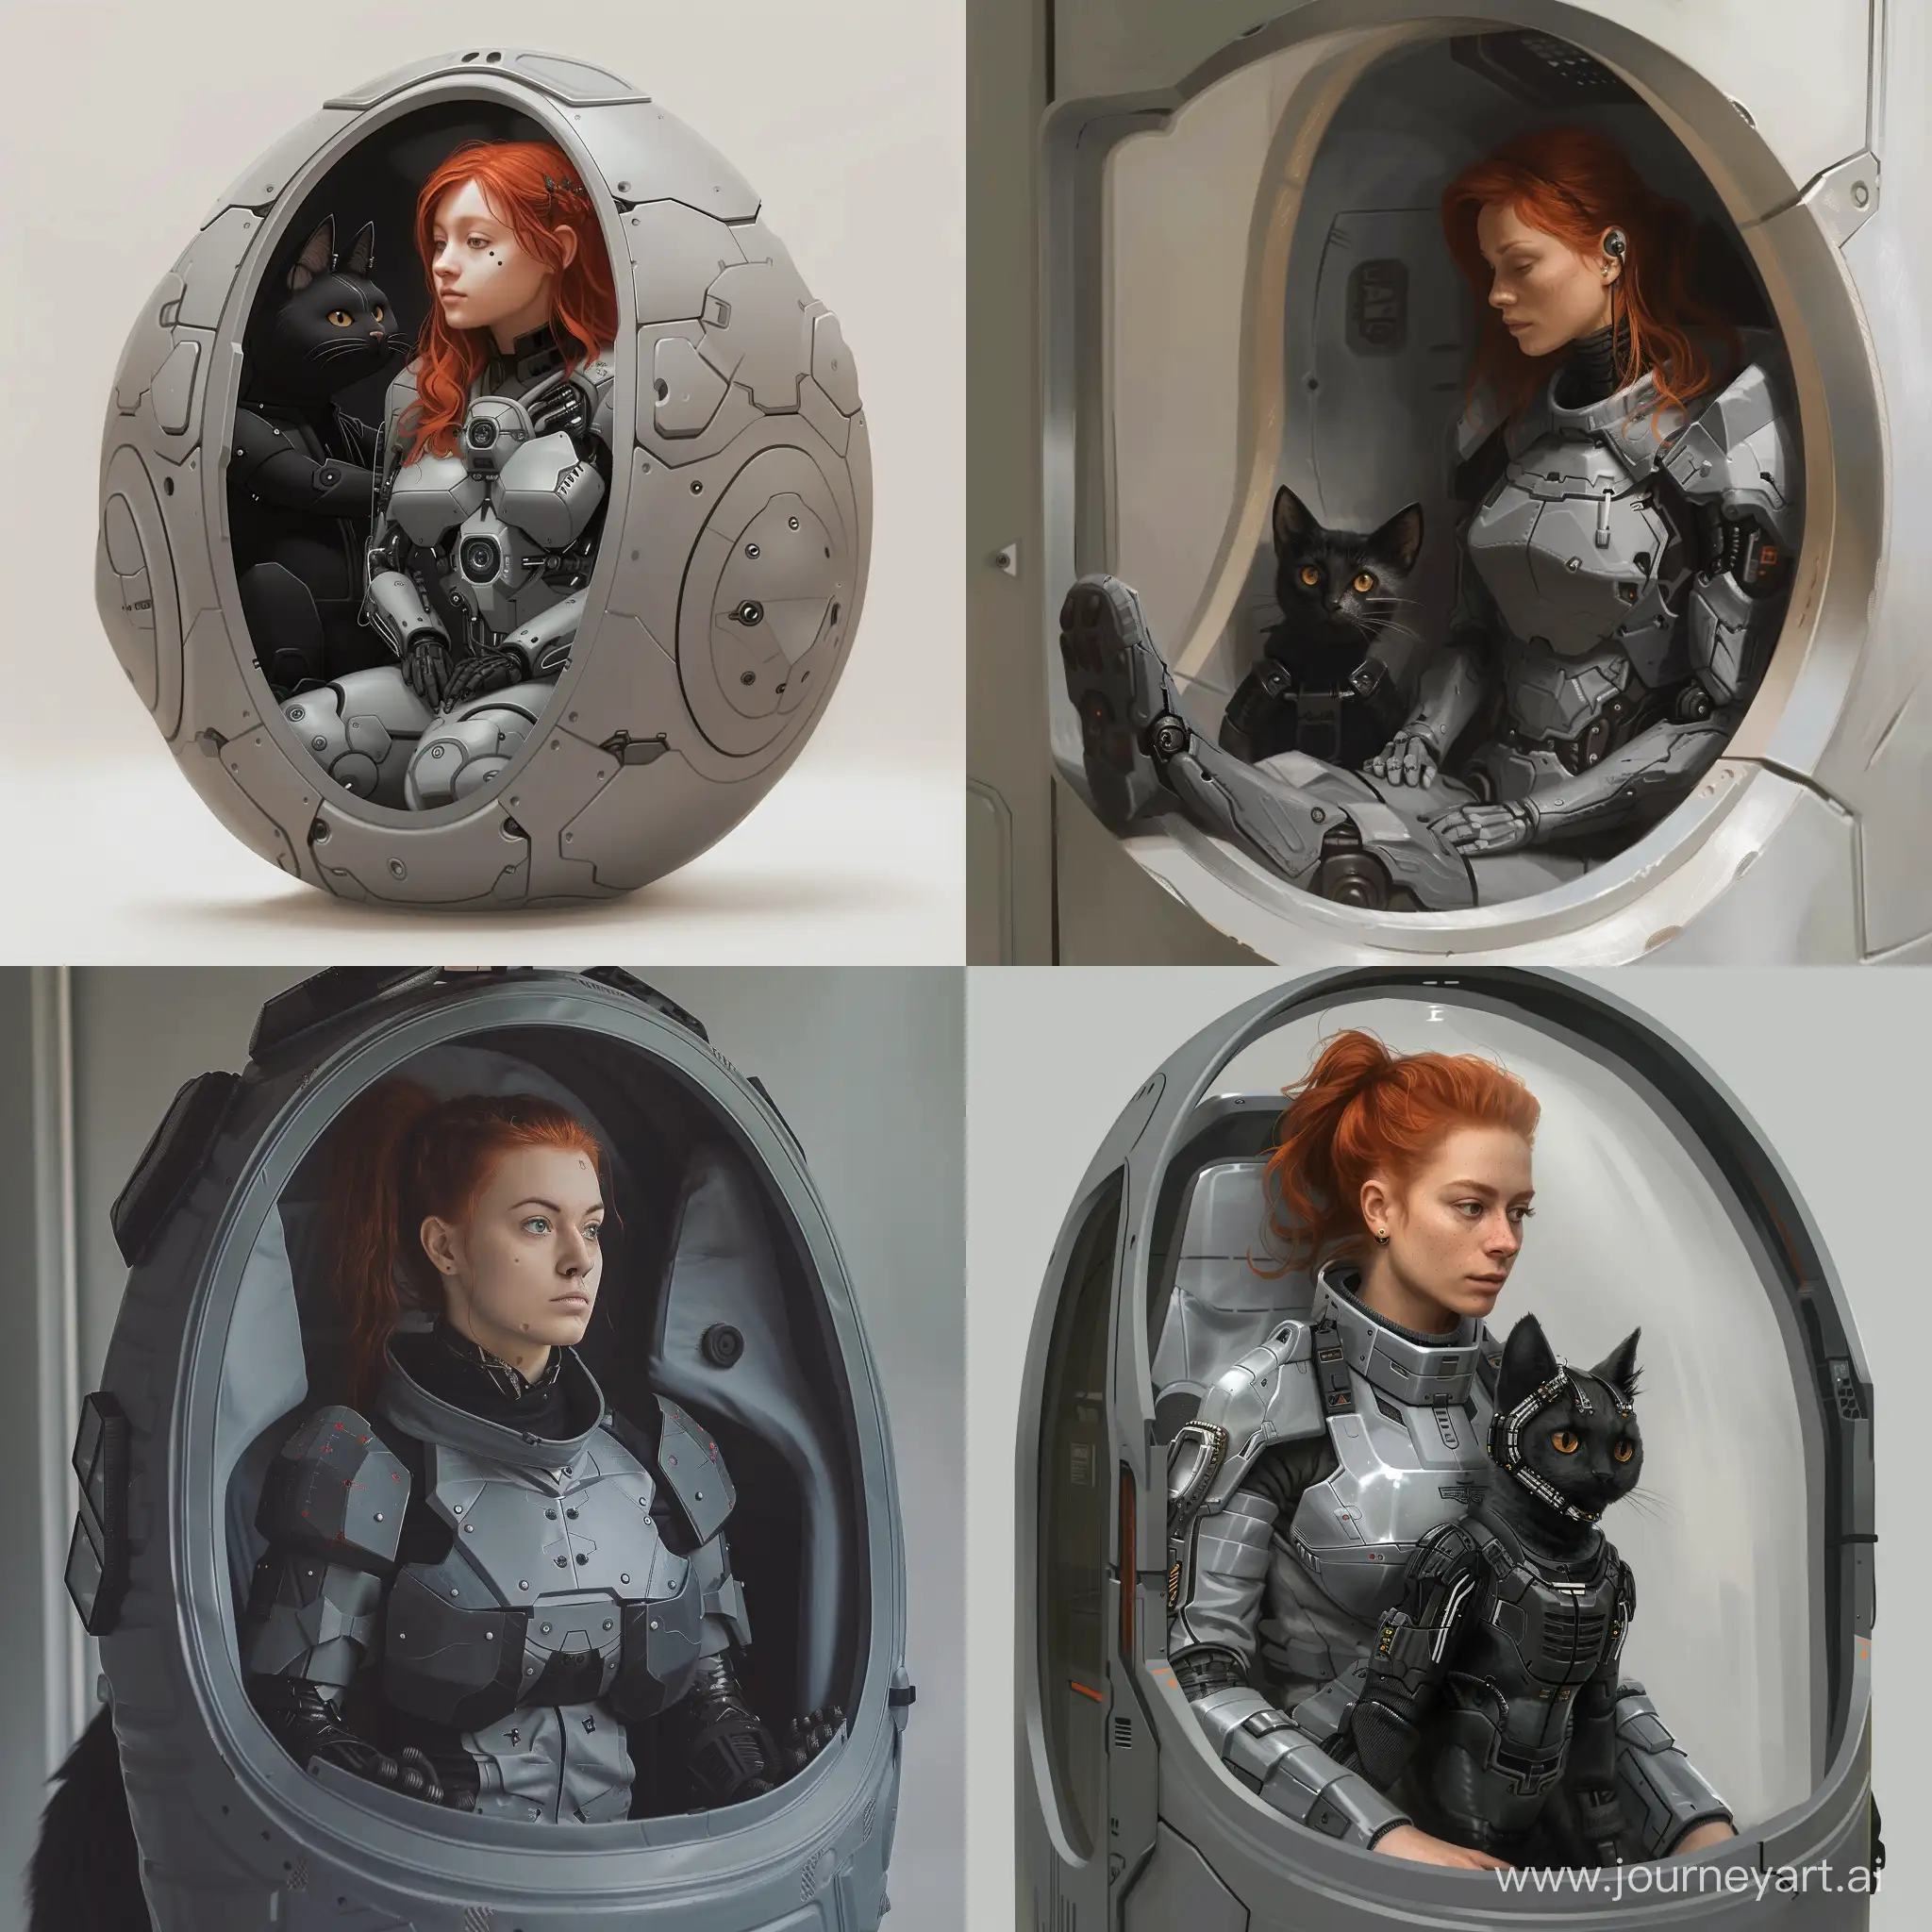 RedHaired-Woman-in-Bionic-Armor-with-Cybernetic-Cat-Companion